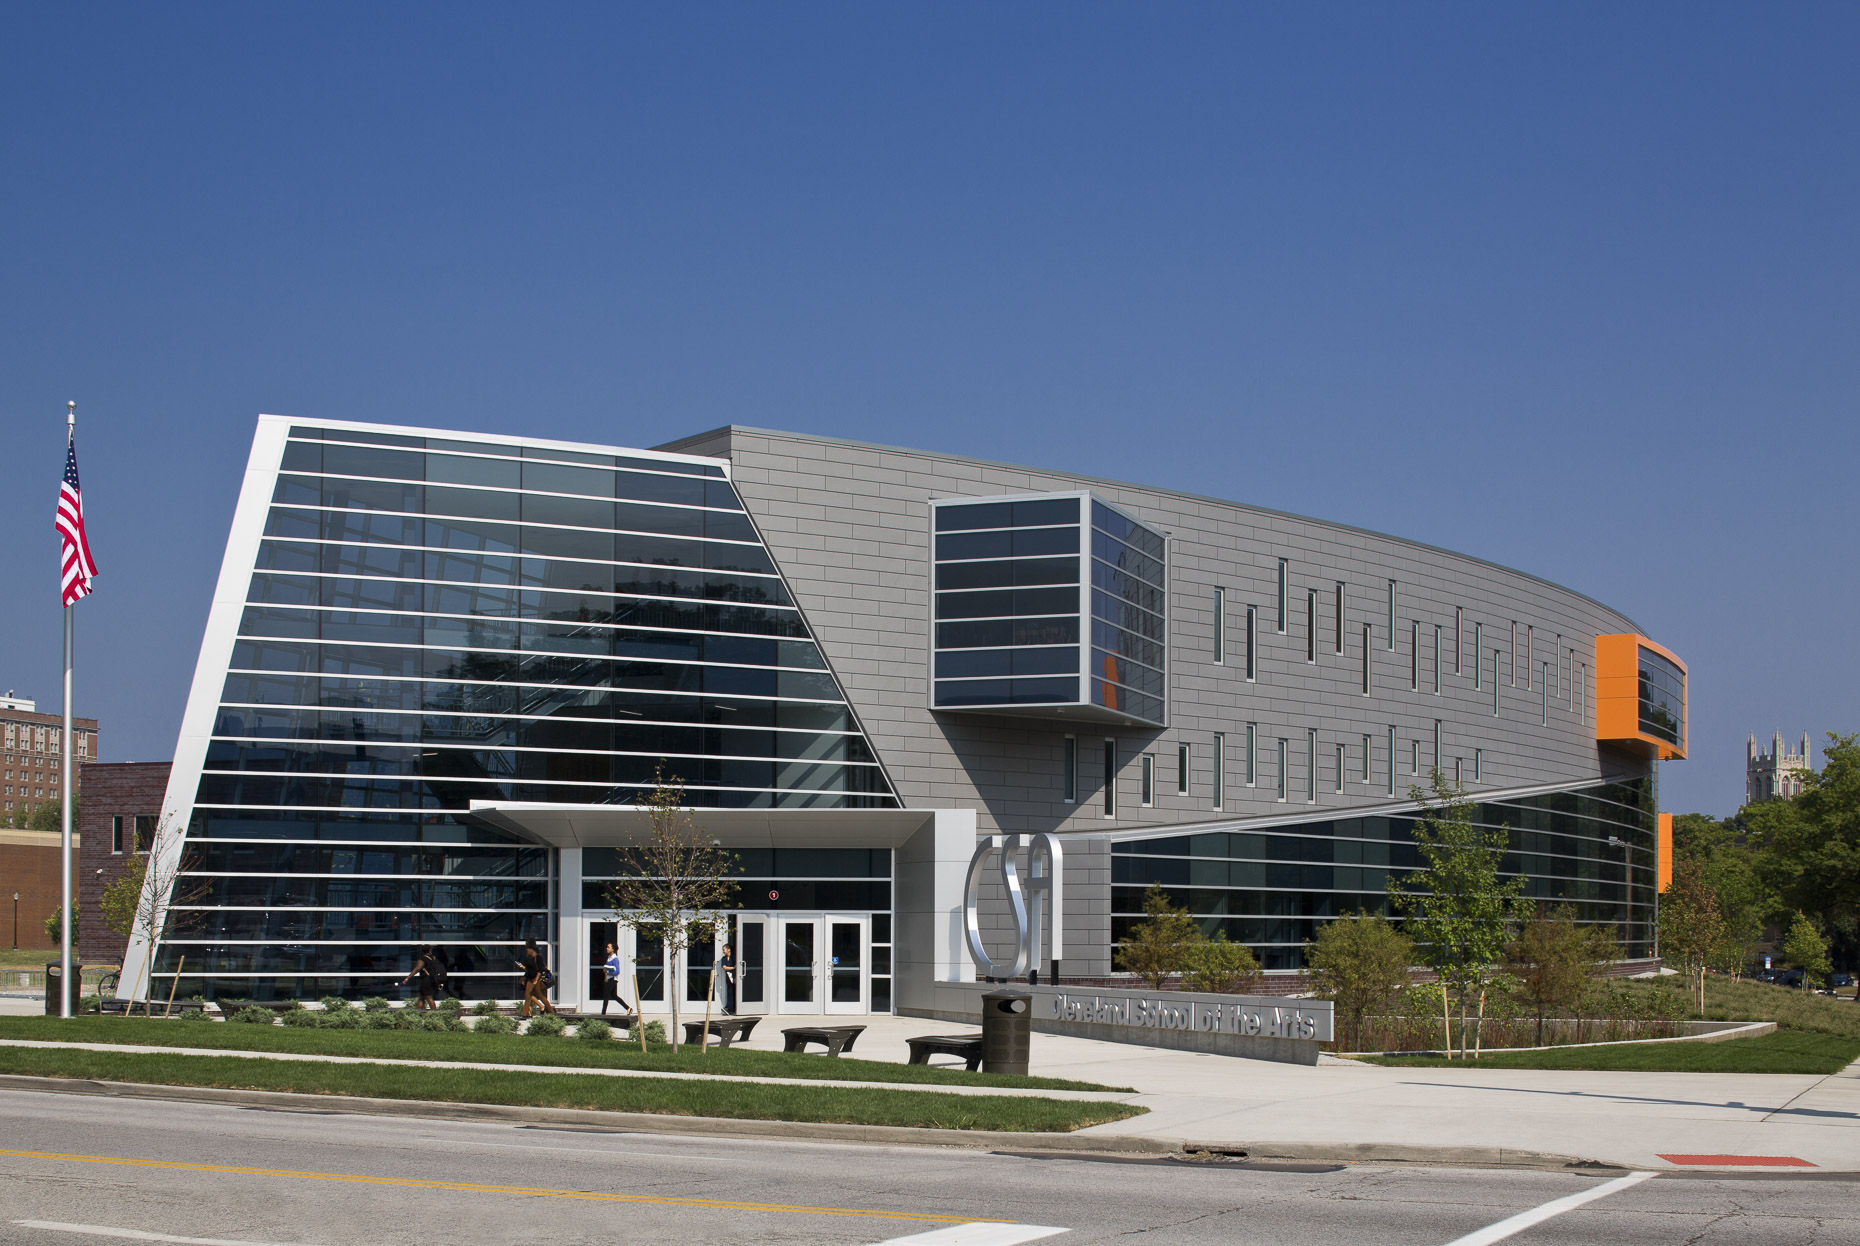 Cleveland School of the Arts by Moody Nolan photographed by Lauren K Davis based in Columbus, Ohio